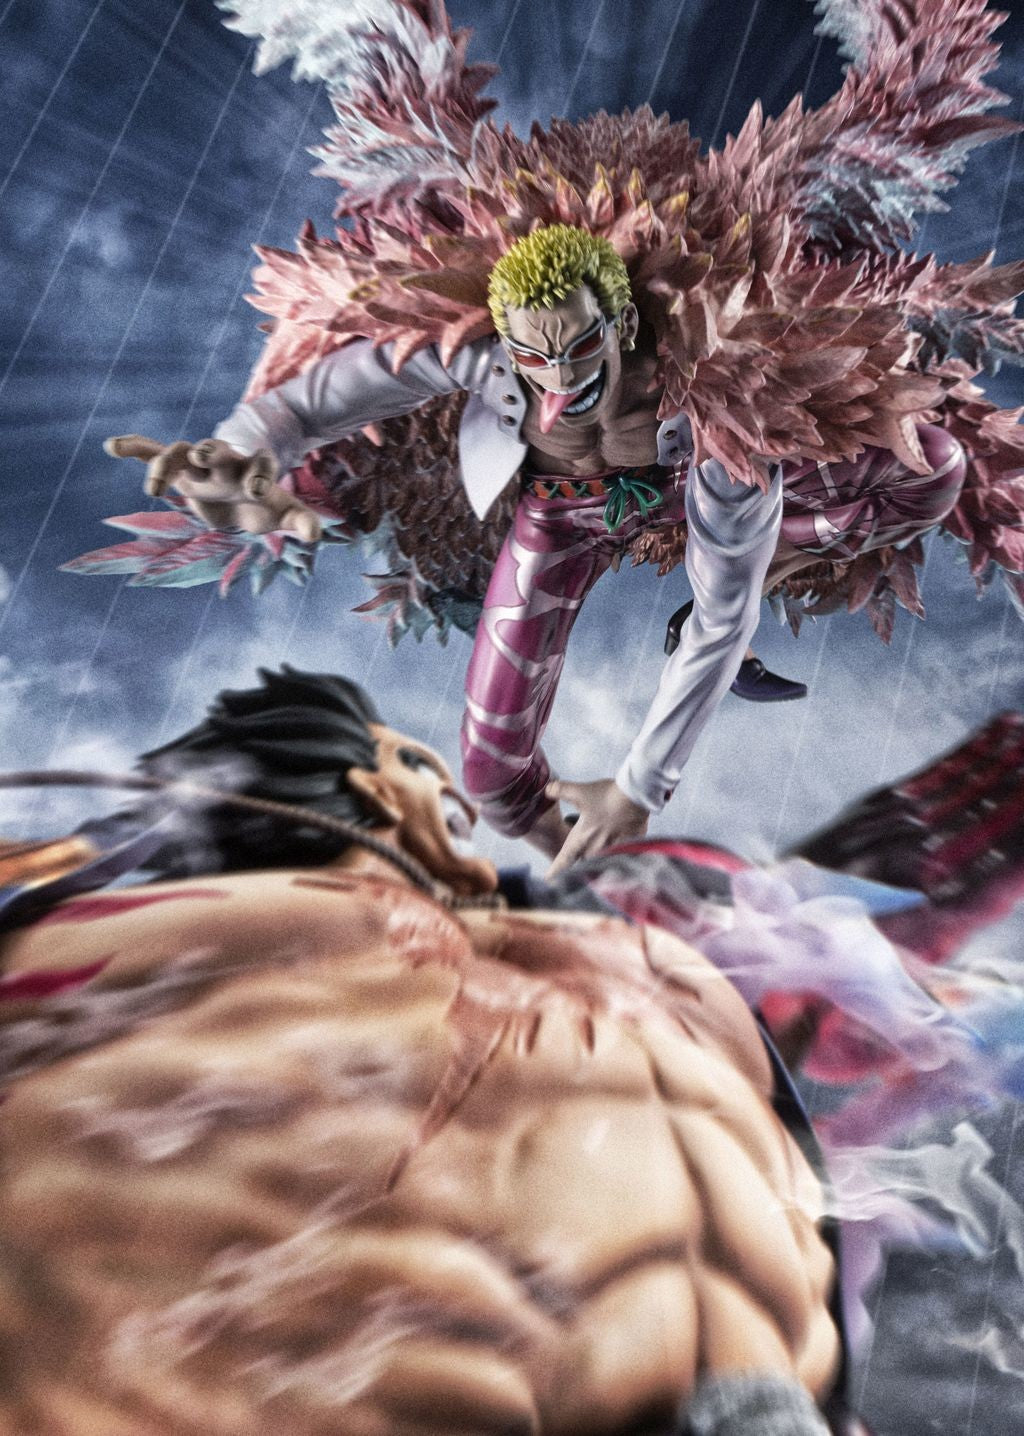 One Piece - Donquixote Doflamingo - Portrait Of Pirates "SA-MAXIMUM" - Heavenly Demon (MegaHouse) [Shop Exclusive], Franchise: One Piece, Brand: MegaHouse, Release Date: 27. May 2022, Type: General, Store Name: Nippon Figures